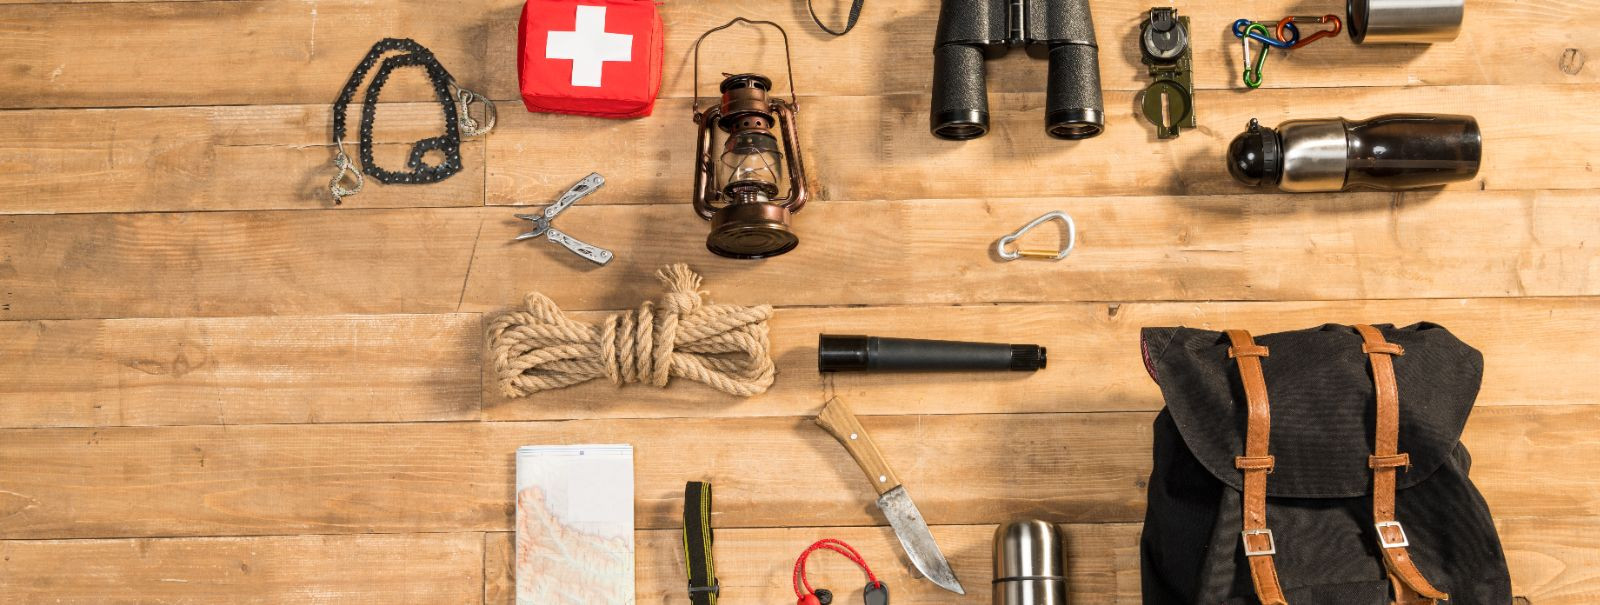 Survival preparedness is not just about having the right gear; it's about understanding the essentials that will keep you alive in an emergency. This includes t